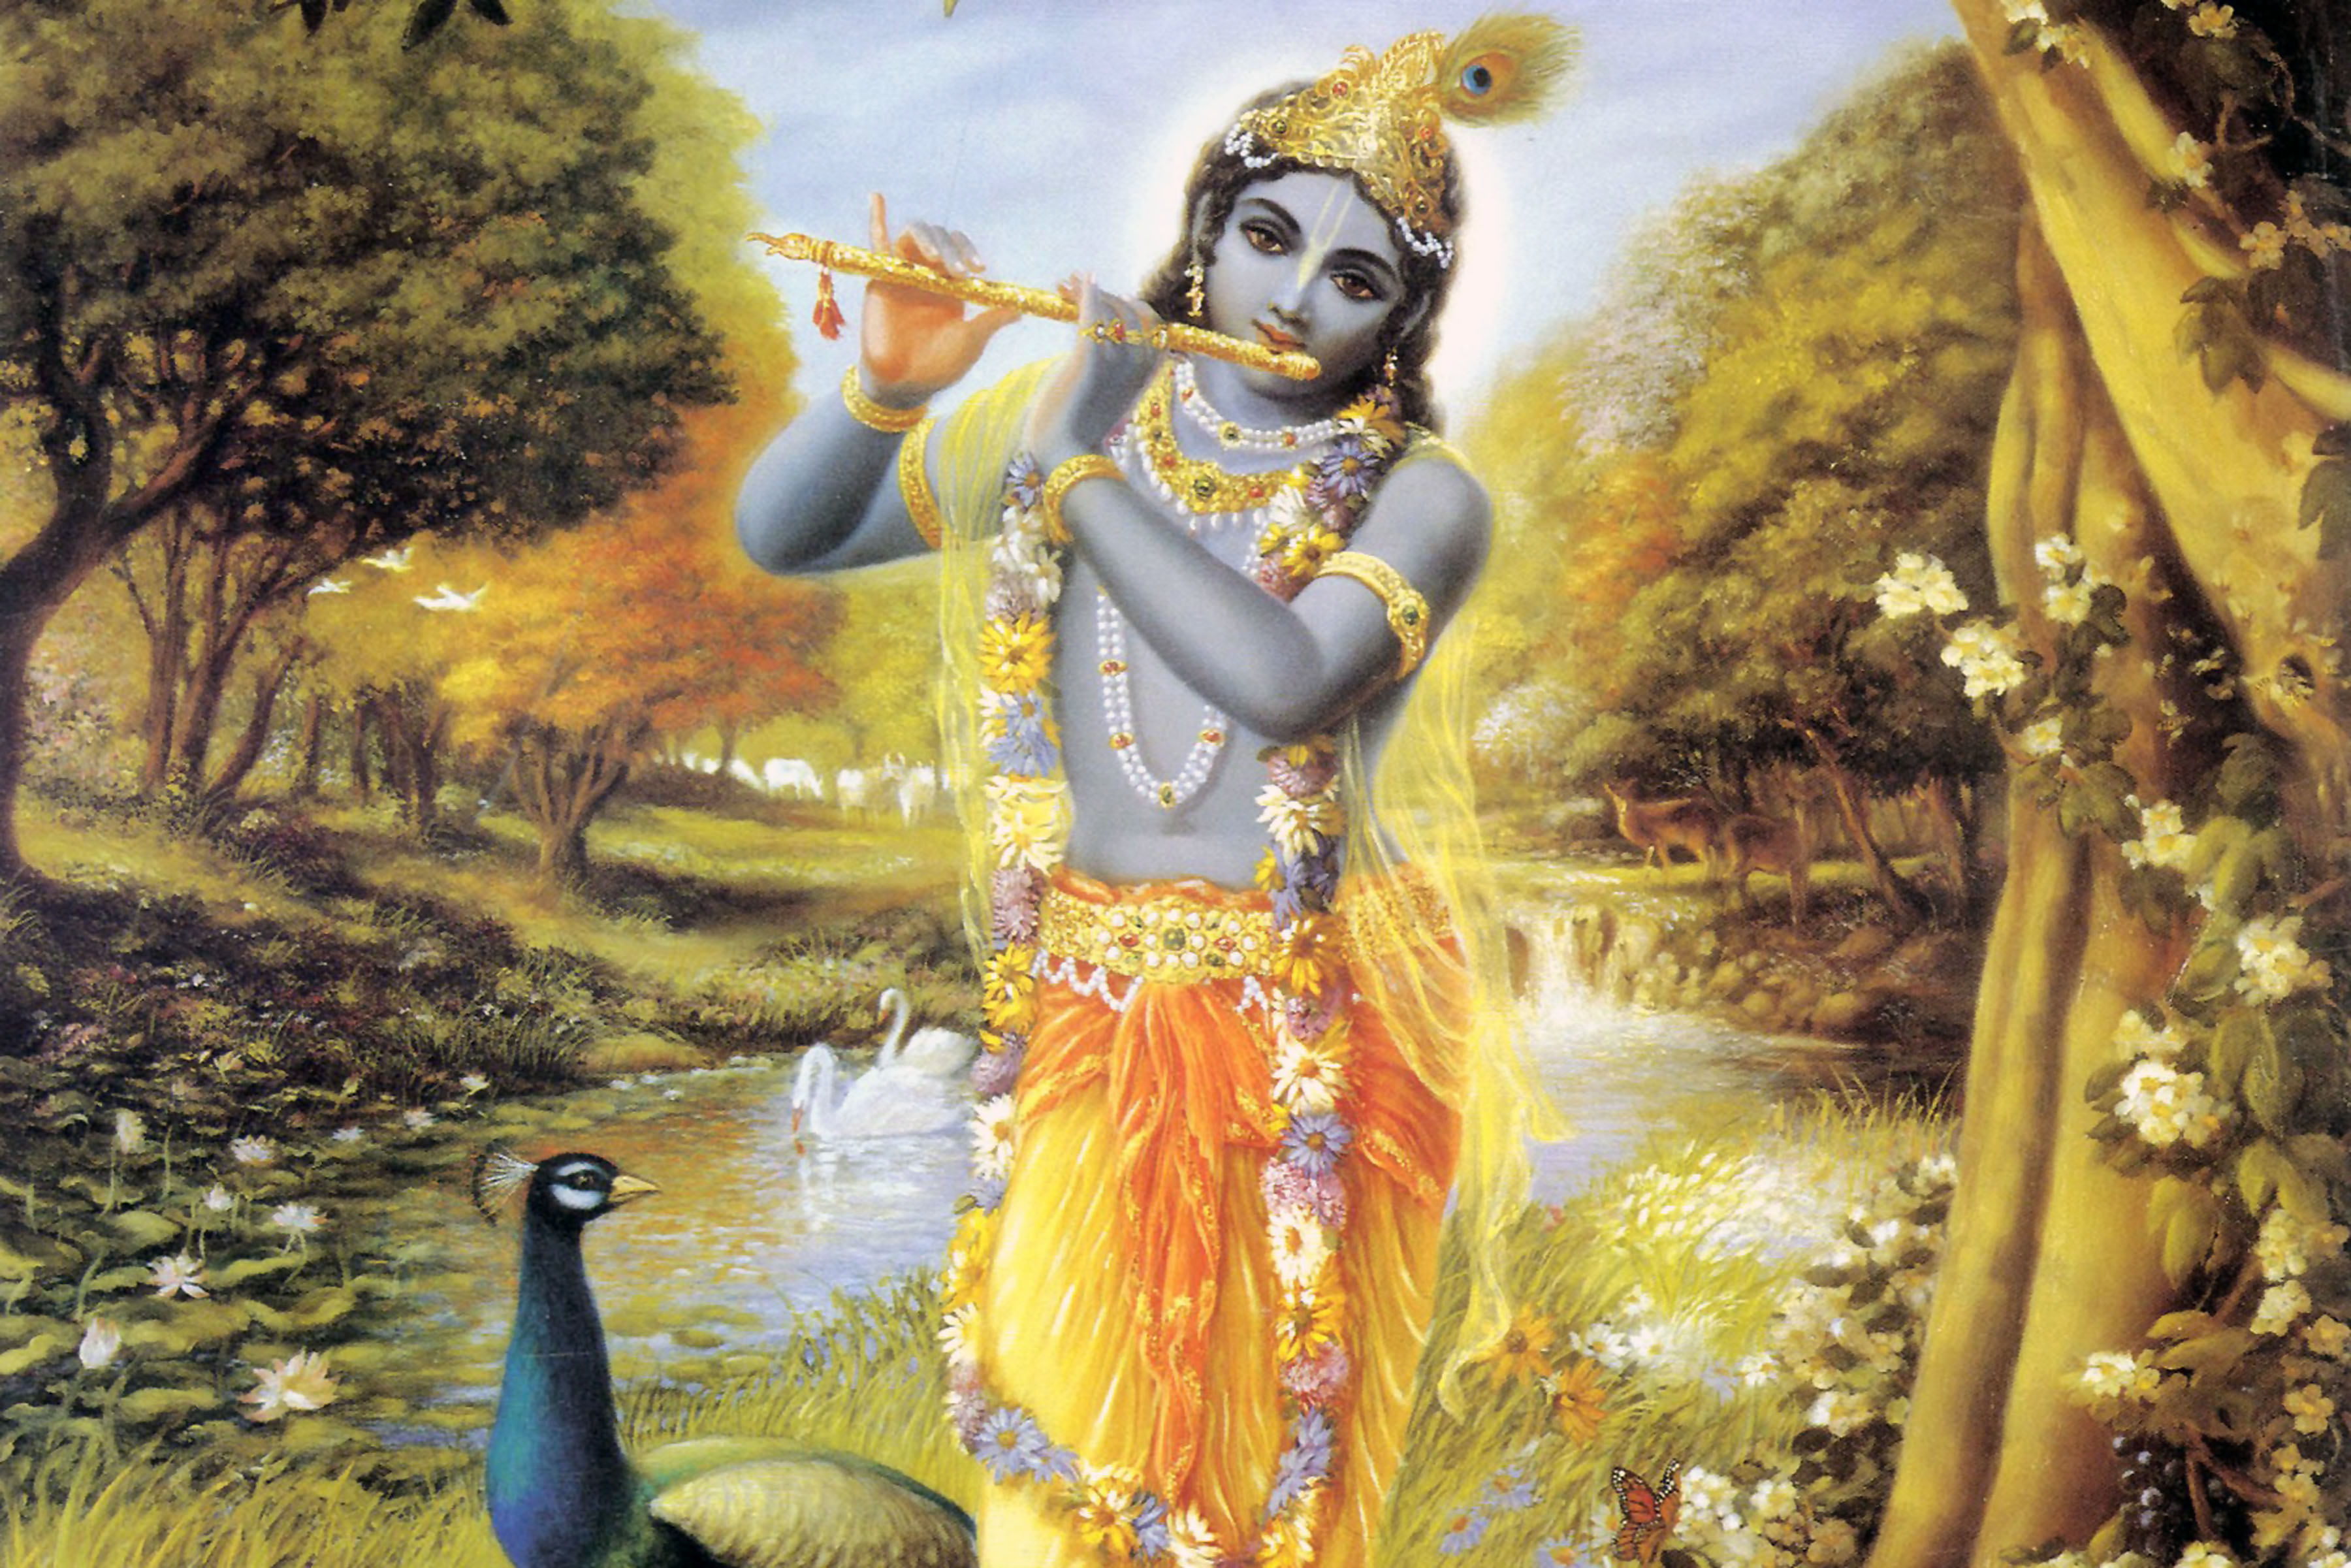 Krishna, Hinduism, diety - HD Wallpaper View, Resize and Free Download /  